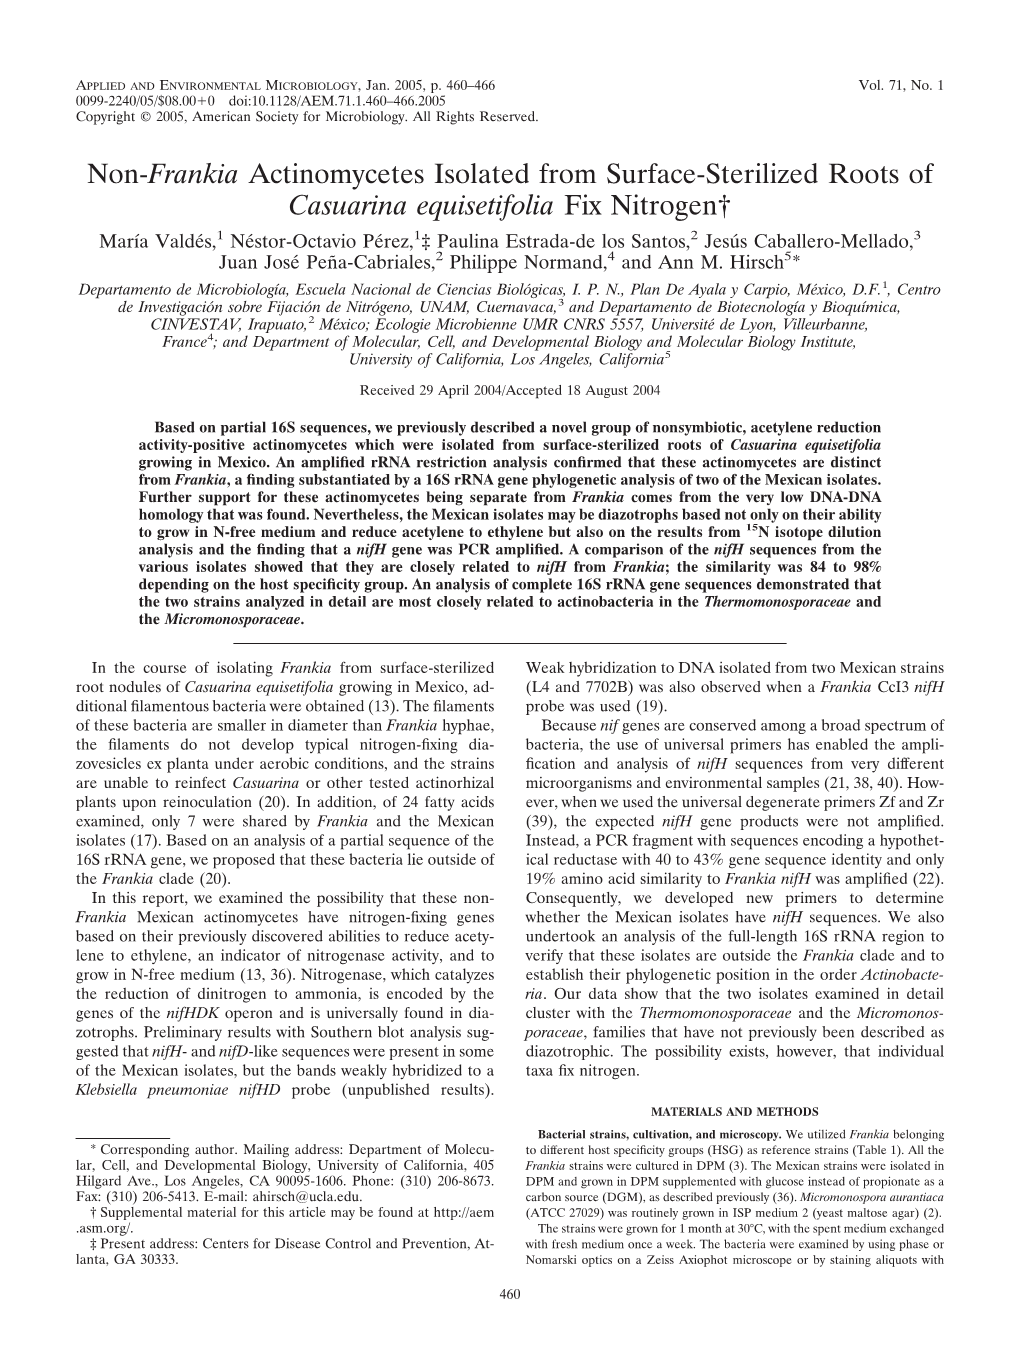 Non-Frankia Actinomycetes Isolated from Surface-Sterilized Roots Of